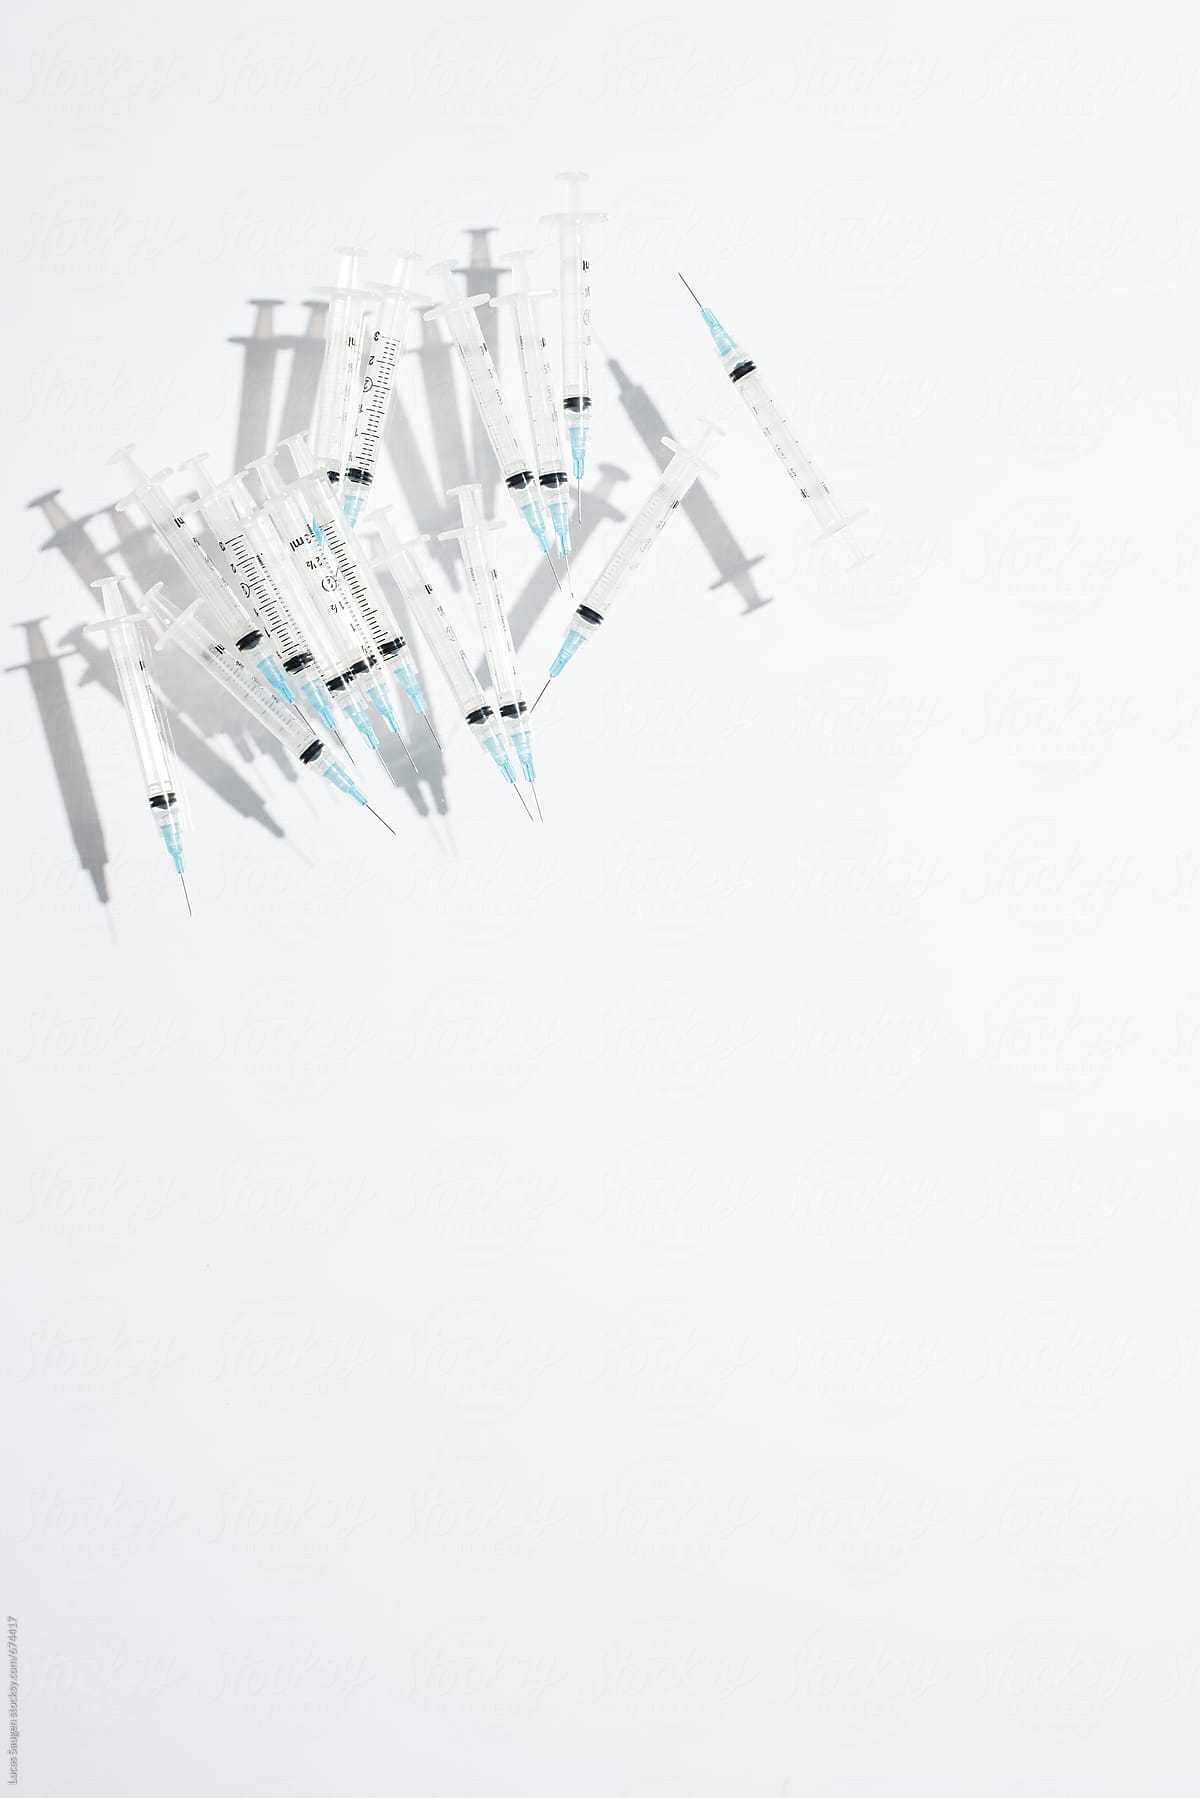 A pile of hypodermic needles casting a shadow in a white surface.